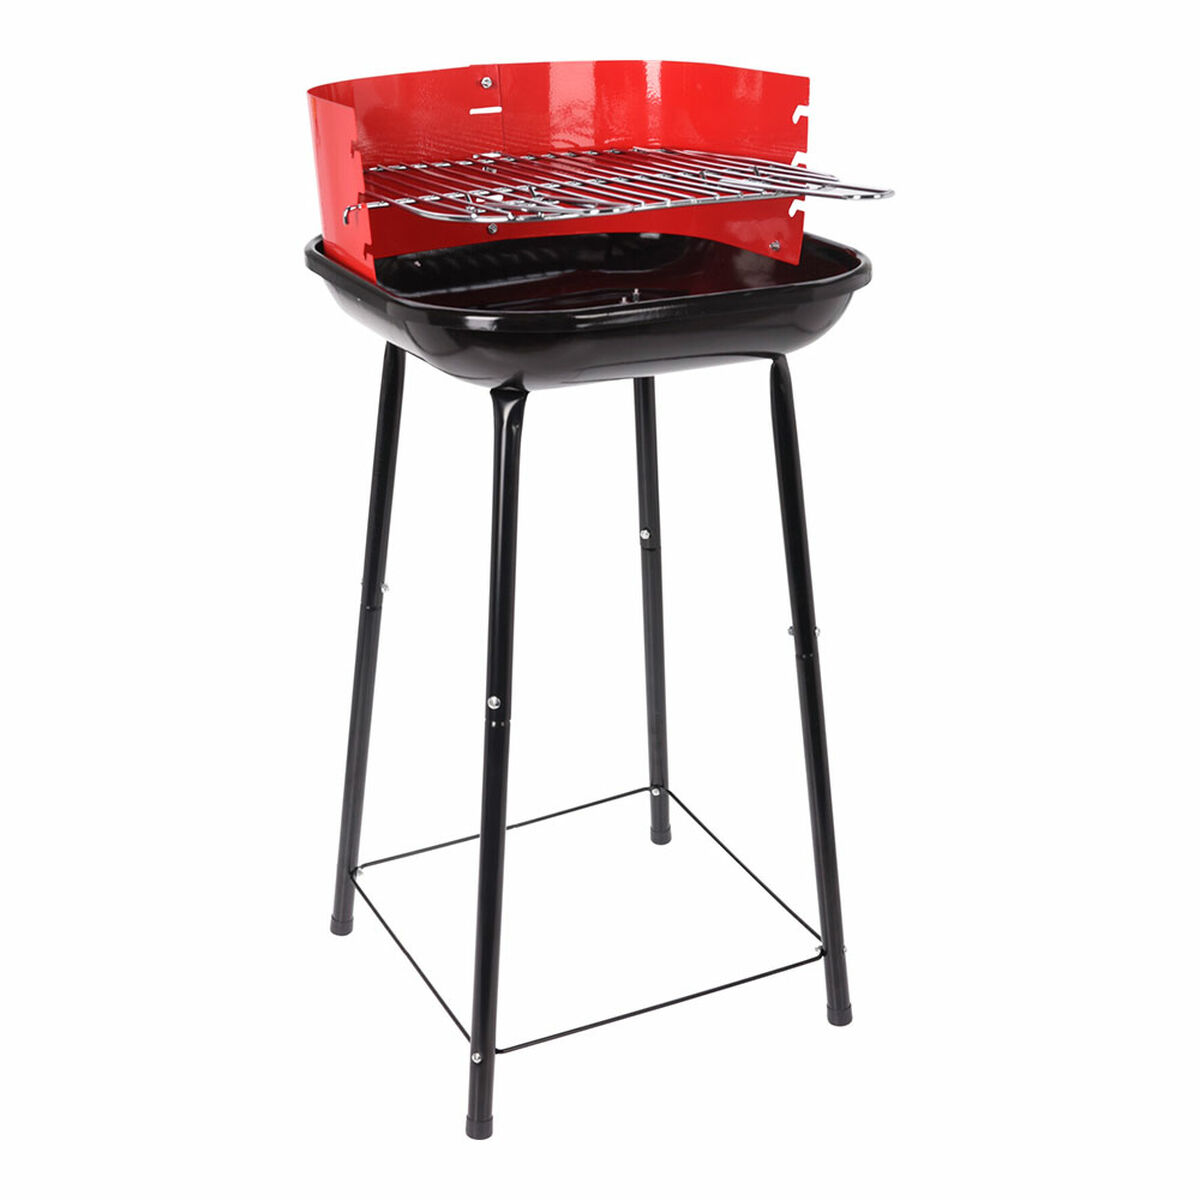 Charcoal Barbecue with Stand Grill 41 x 41 x 74 cm Red/Black